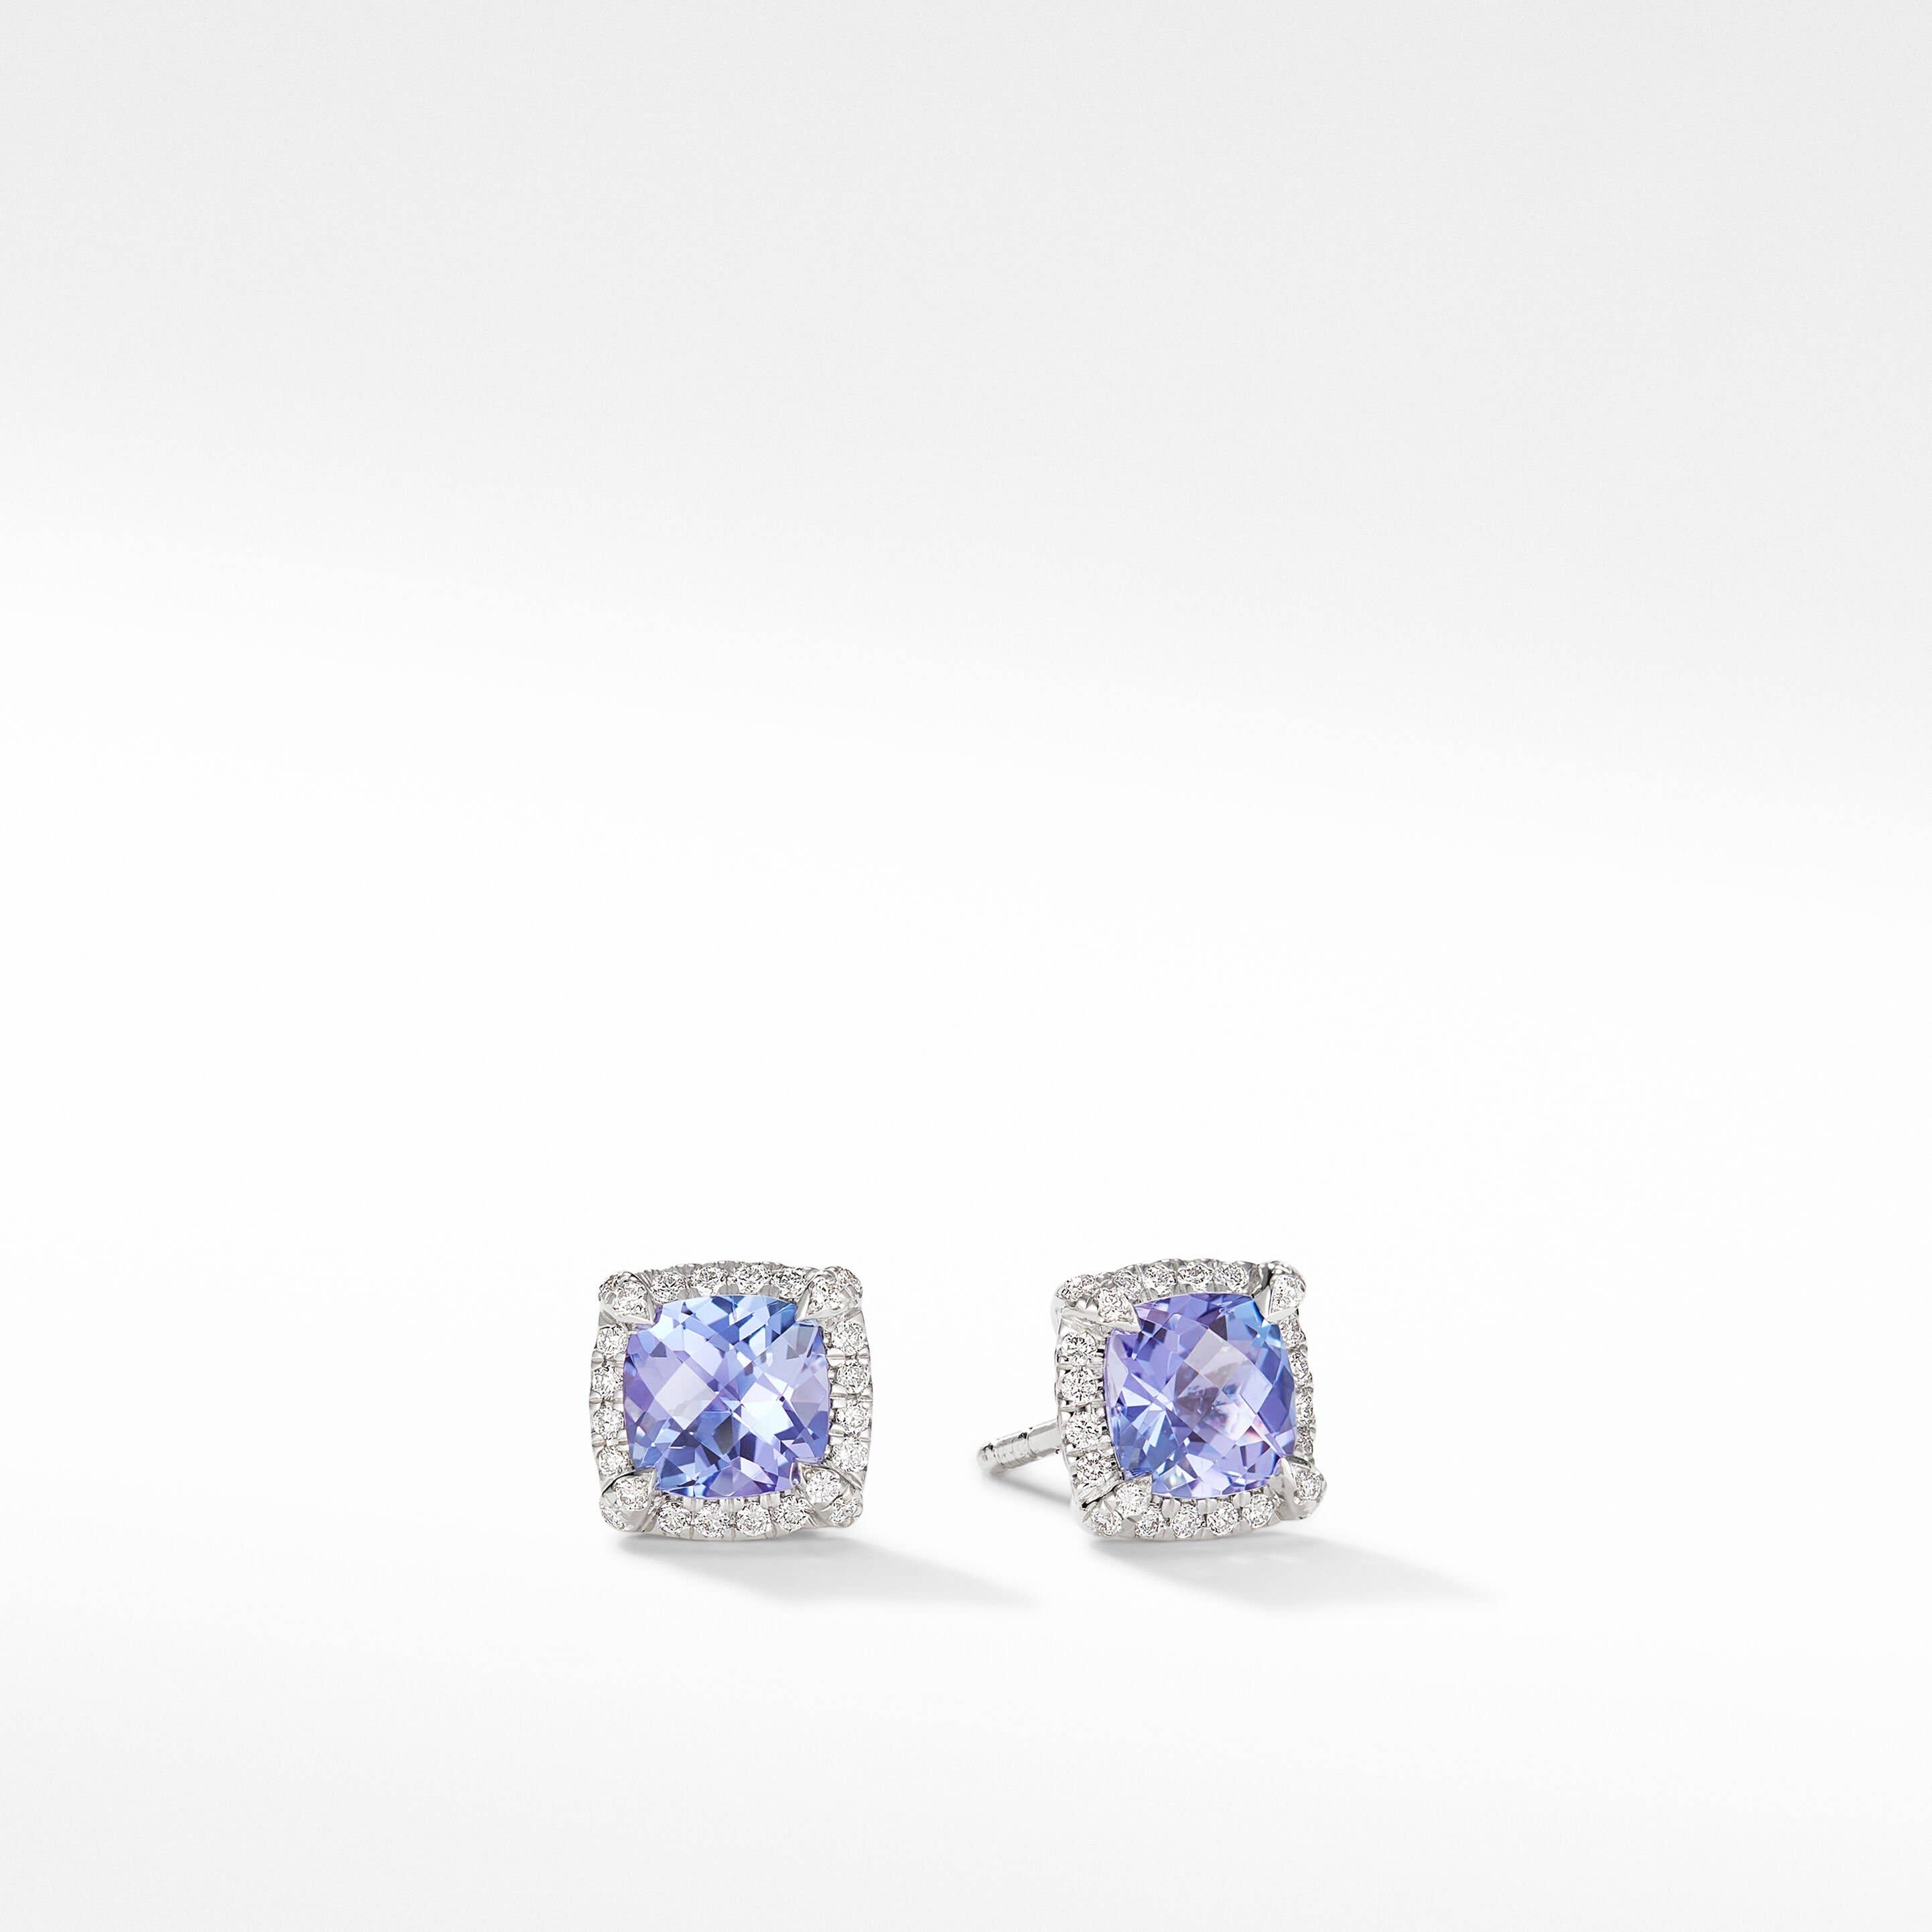 Petite Chatelaine® Pavé Bezel Stud Earrings in 18K White Gold with Tanzanite and Diamonds